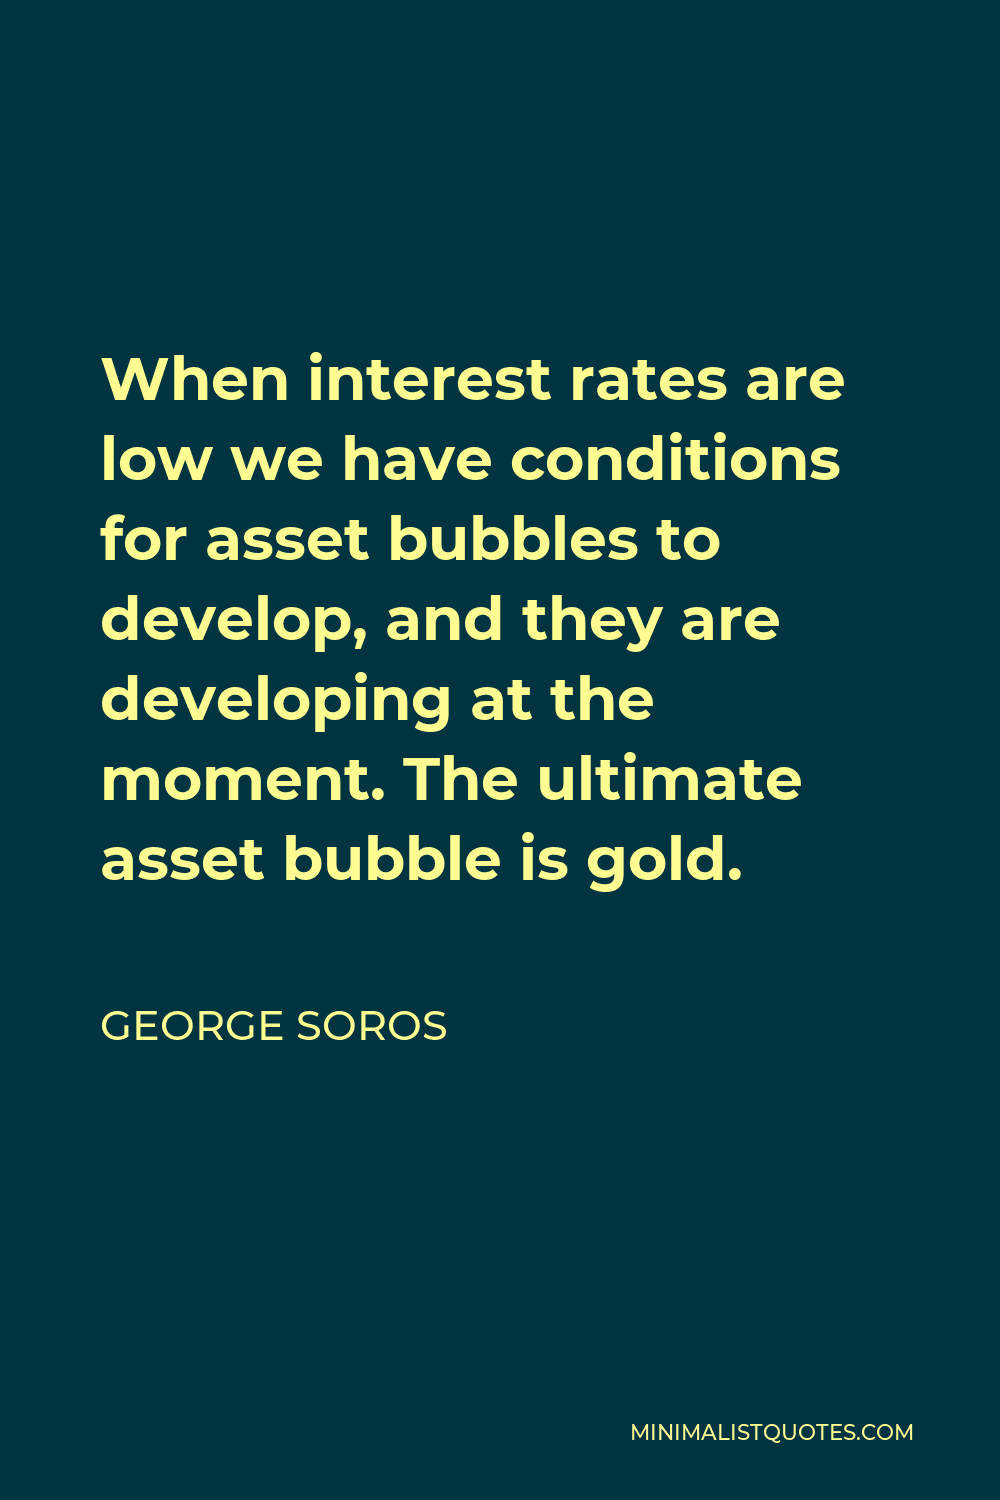 George Soros Quote - When interest rates are low we have conditions for asset bubbles to develop, and they are developing at the moment. The ultimate asset bubble is gold.